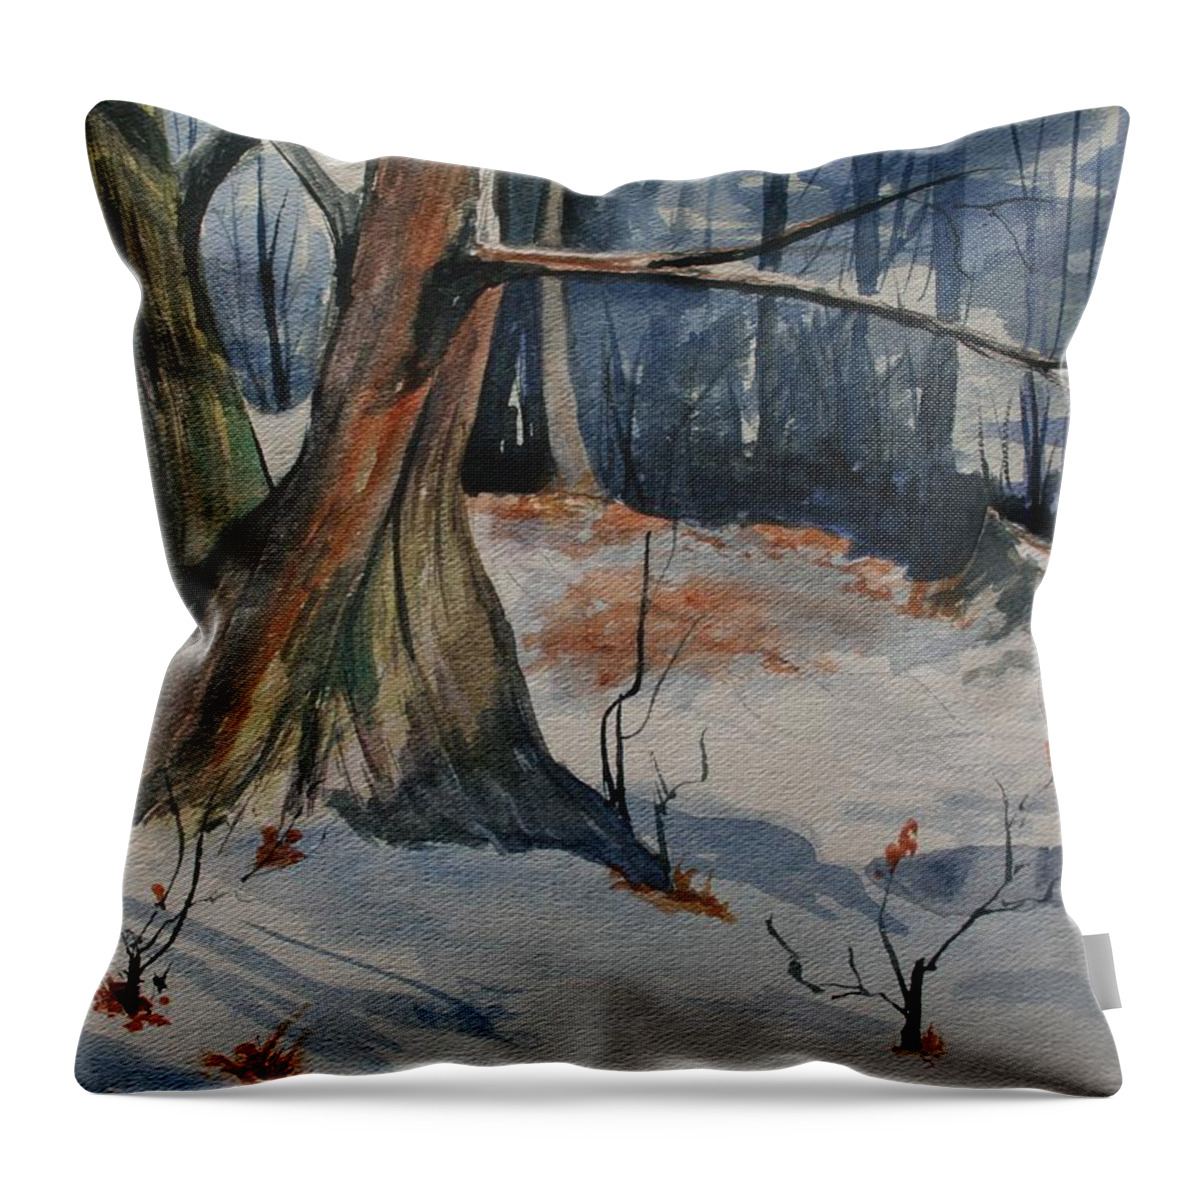 Snow Throw Pillow featuring the painting Tribute to John Pike by Julie Lueders 